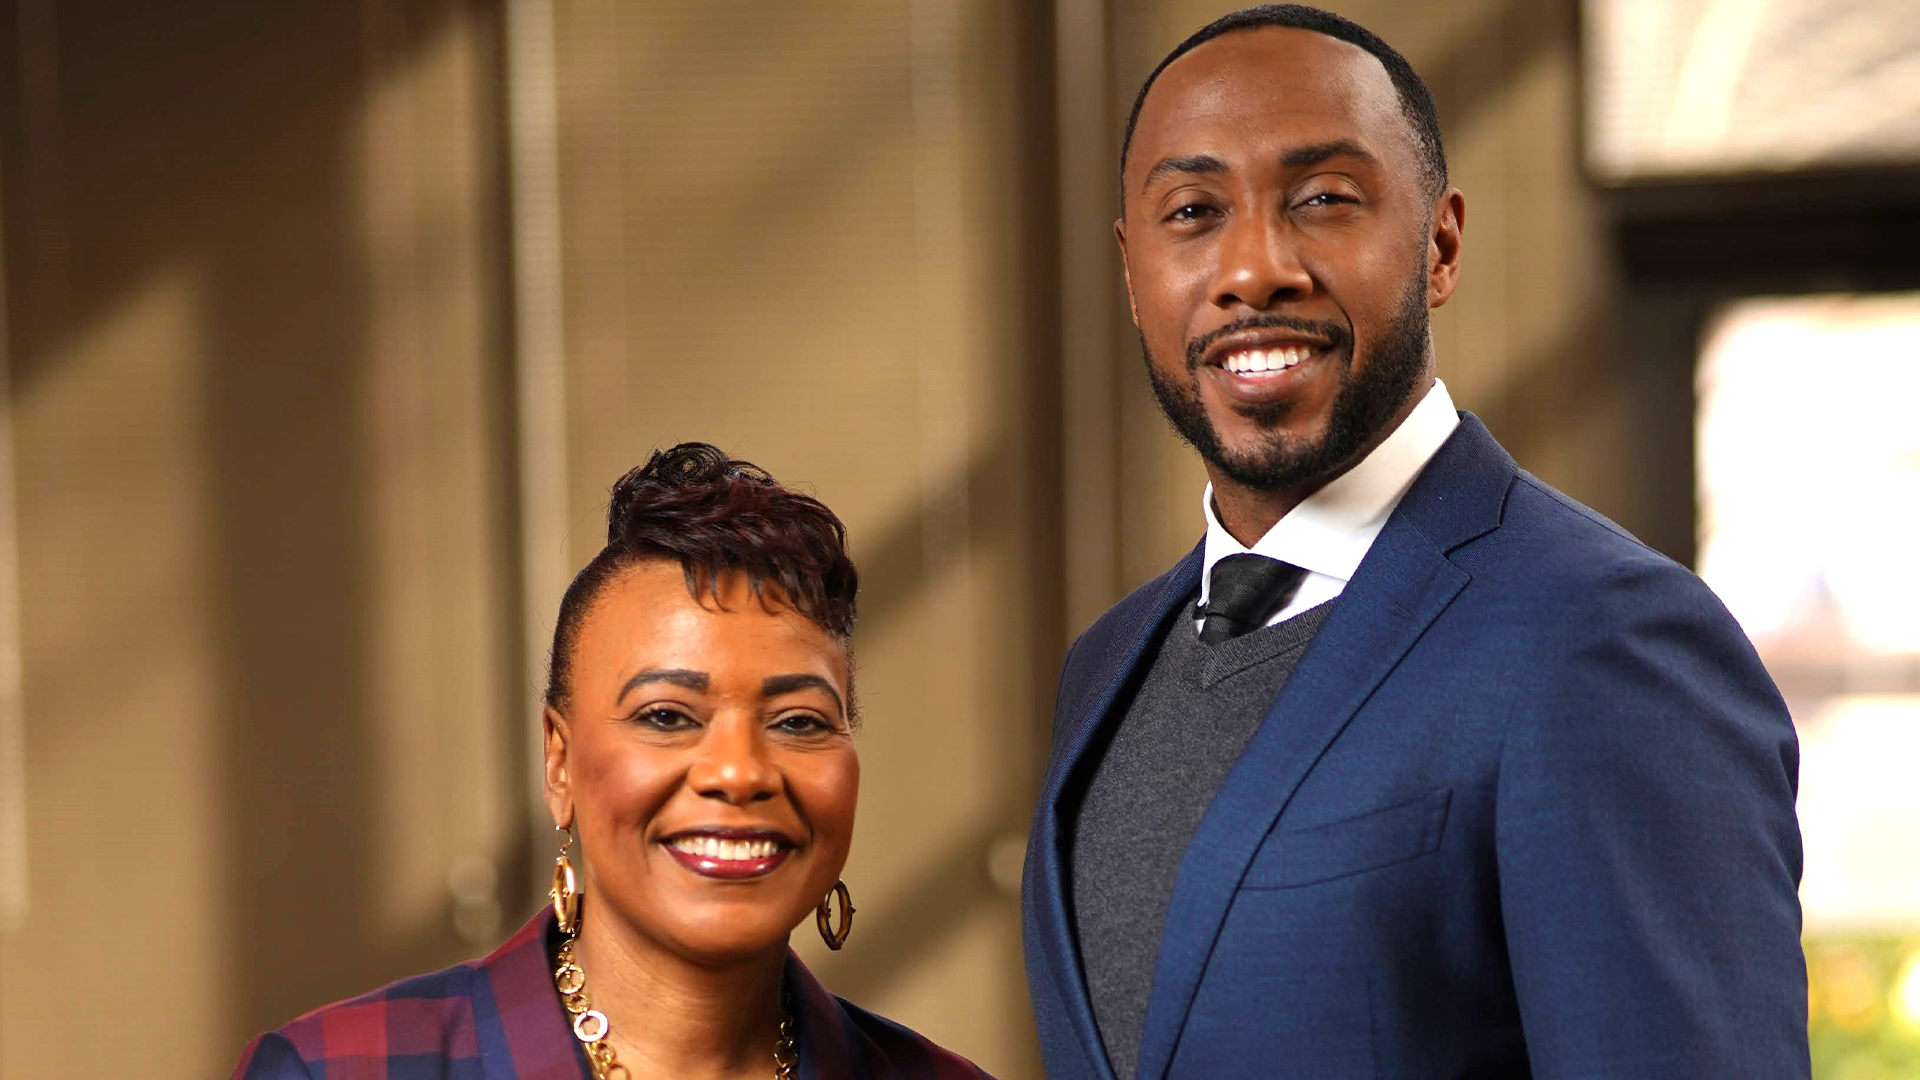 Dr. Bernice A. King and Ashley D. Bell to Launch Ready Life, a Fintech Platform Offering a Path to Homeownership That Excludes Credit Scores from Eligibility Requirements